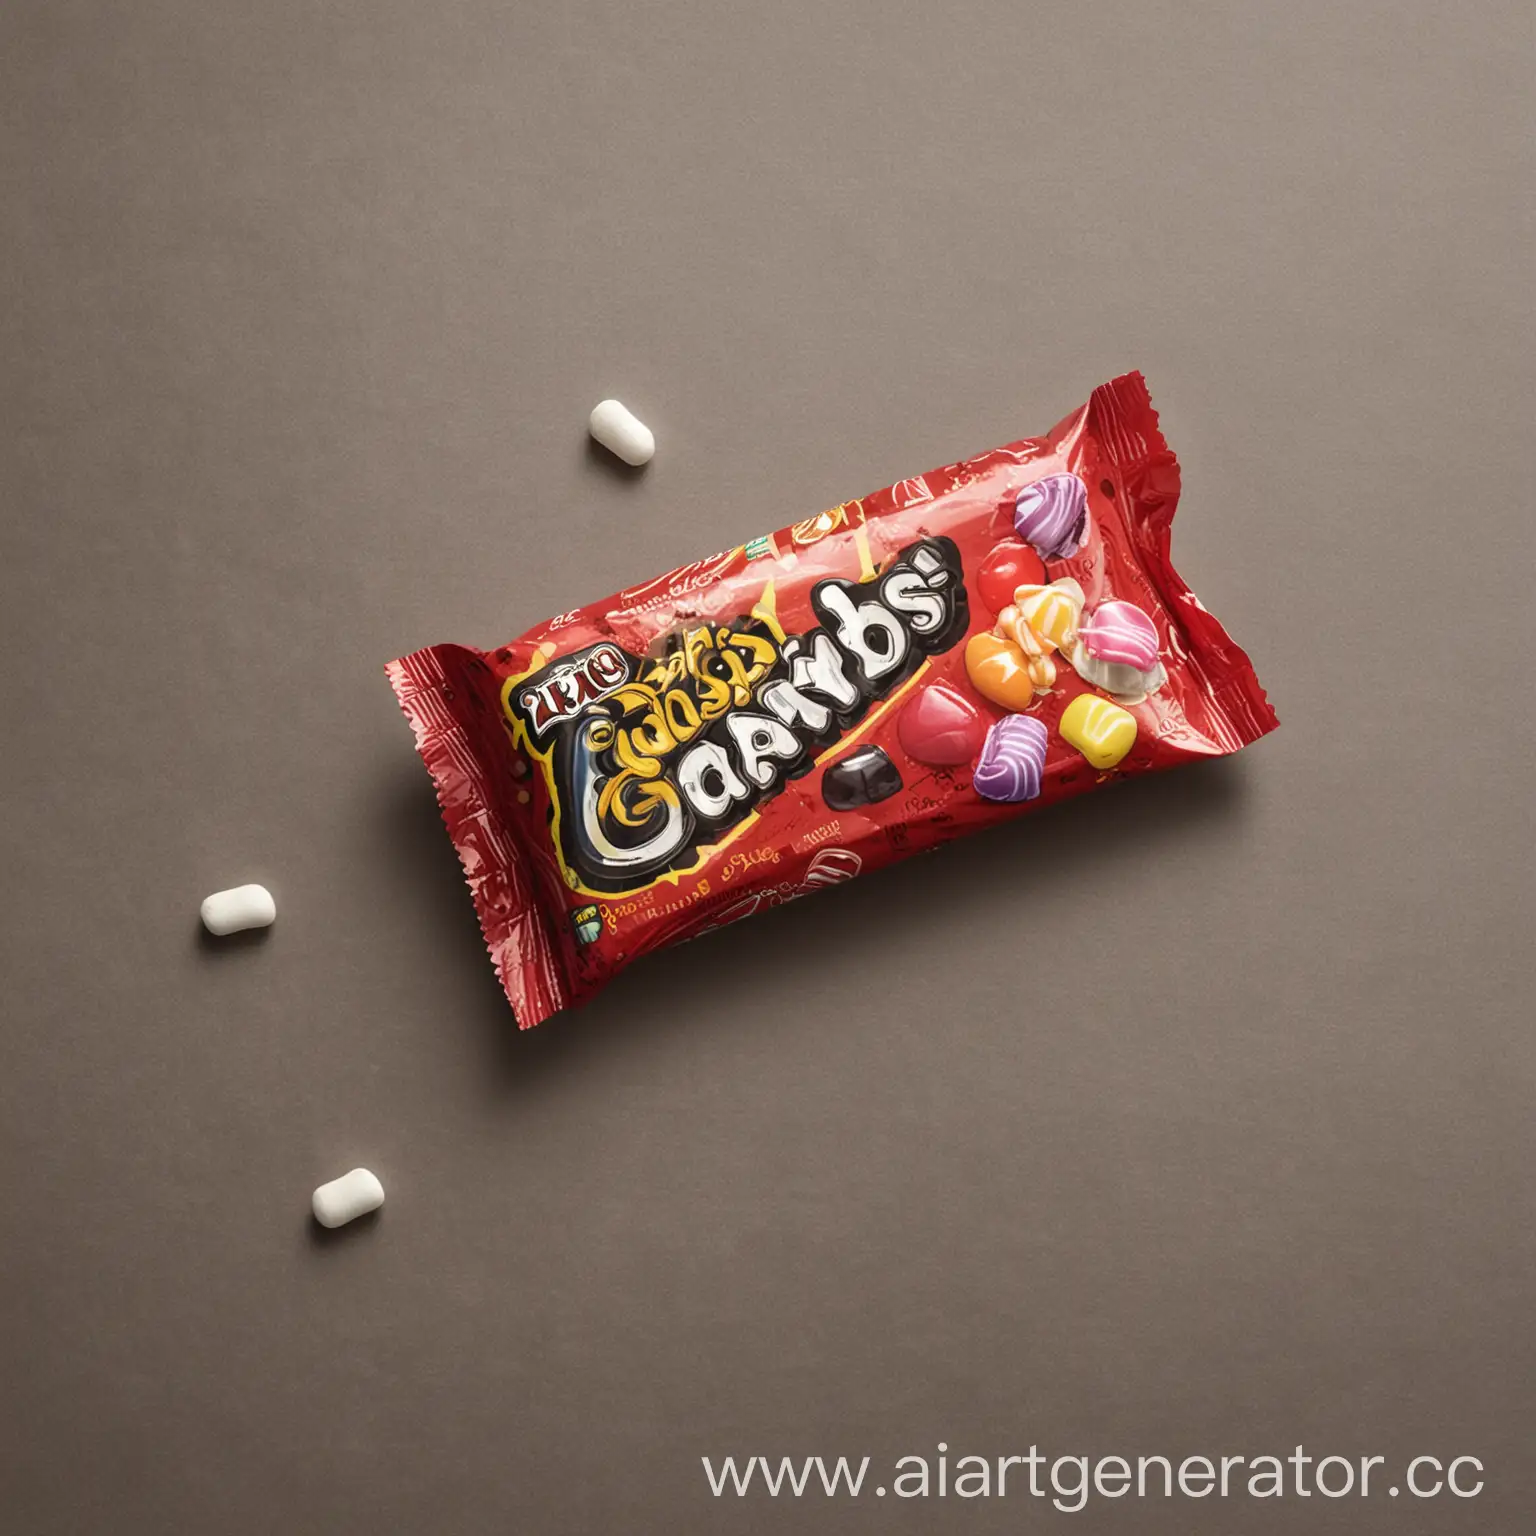 Colorful-Candy-Wrapper-Resting-on-Table-Surface